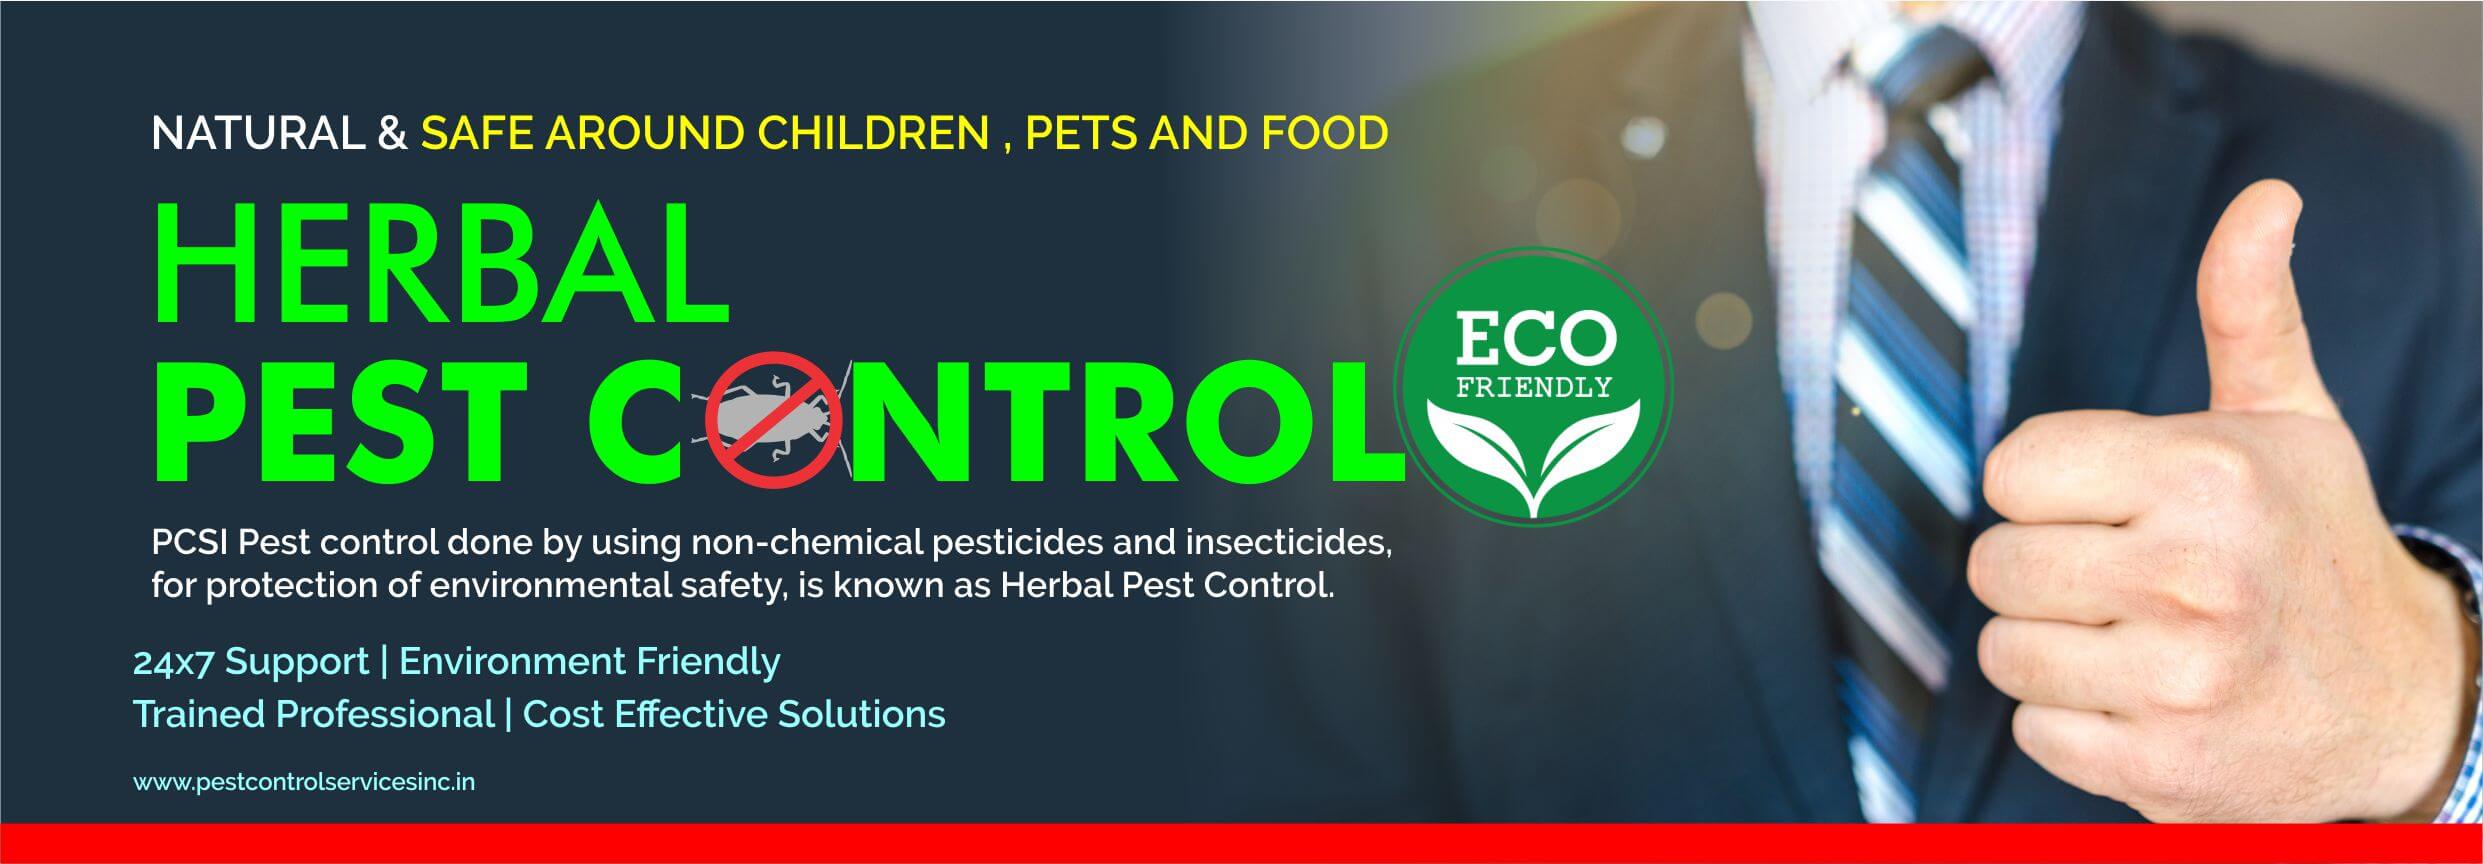 Herbal Pest Control Service in Indore